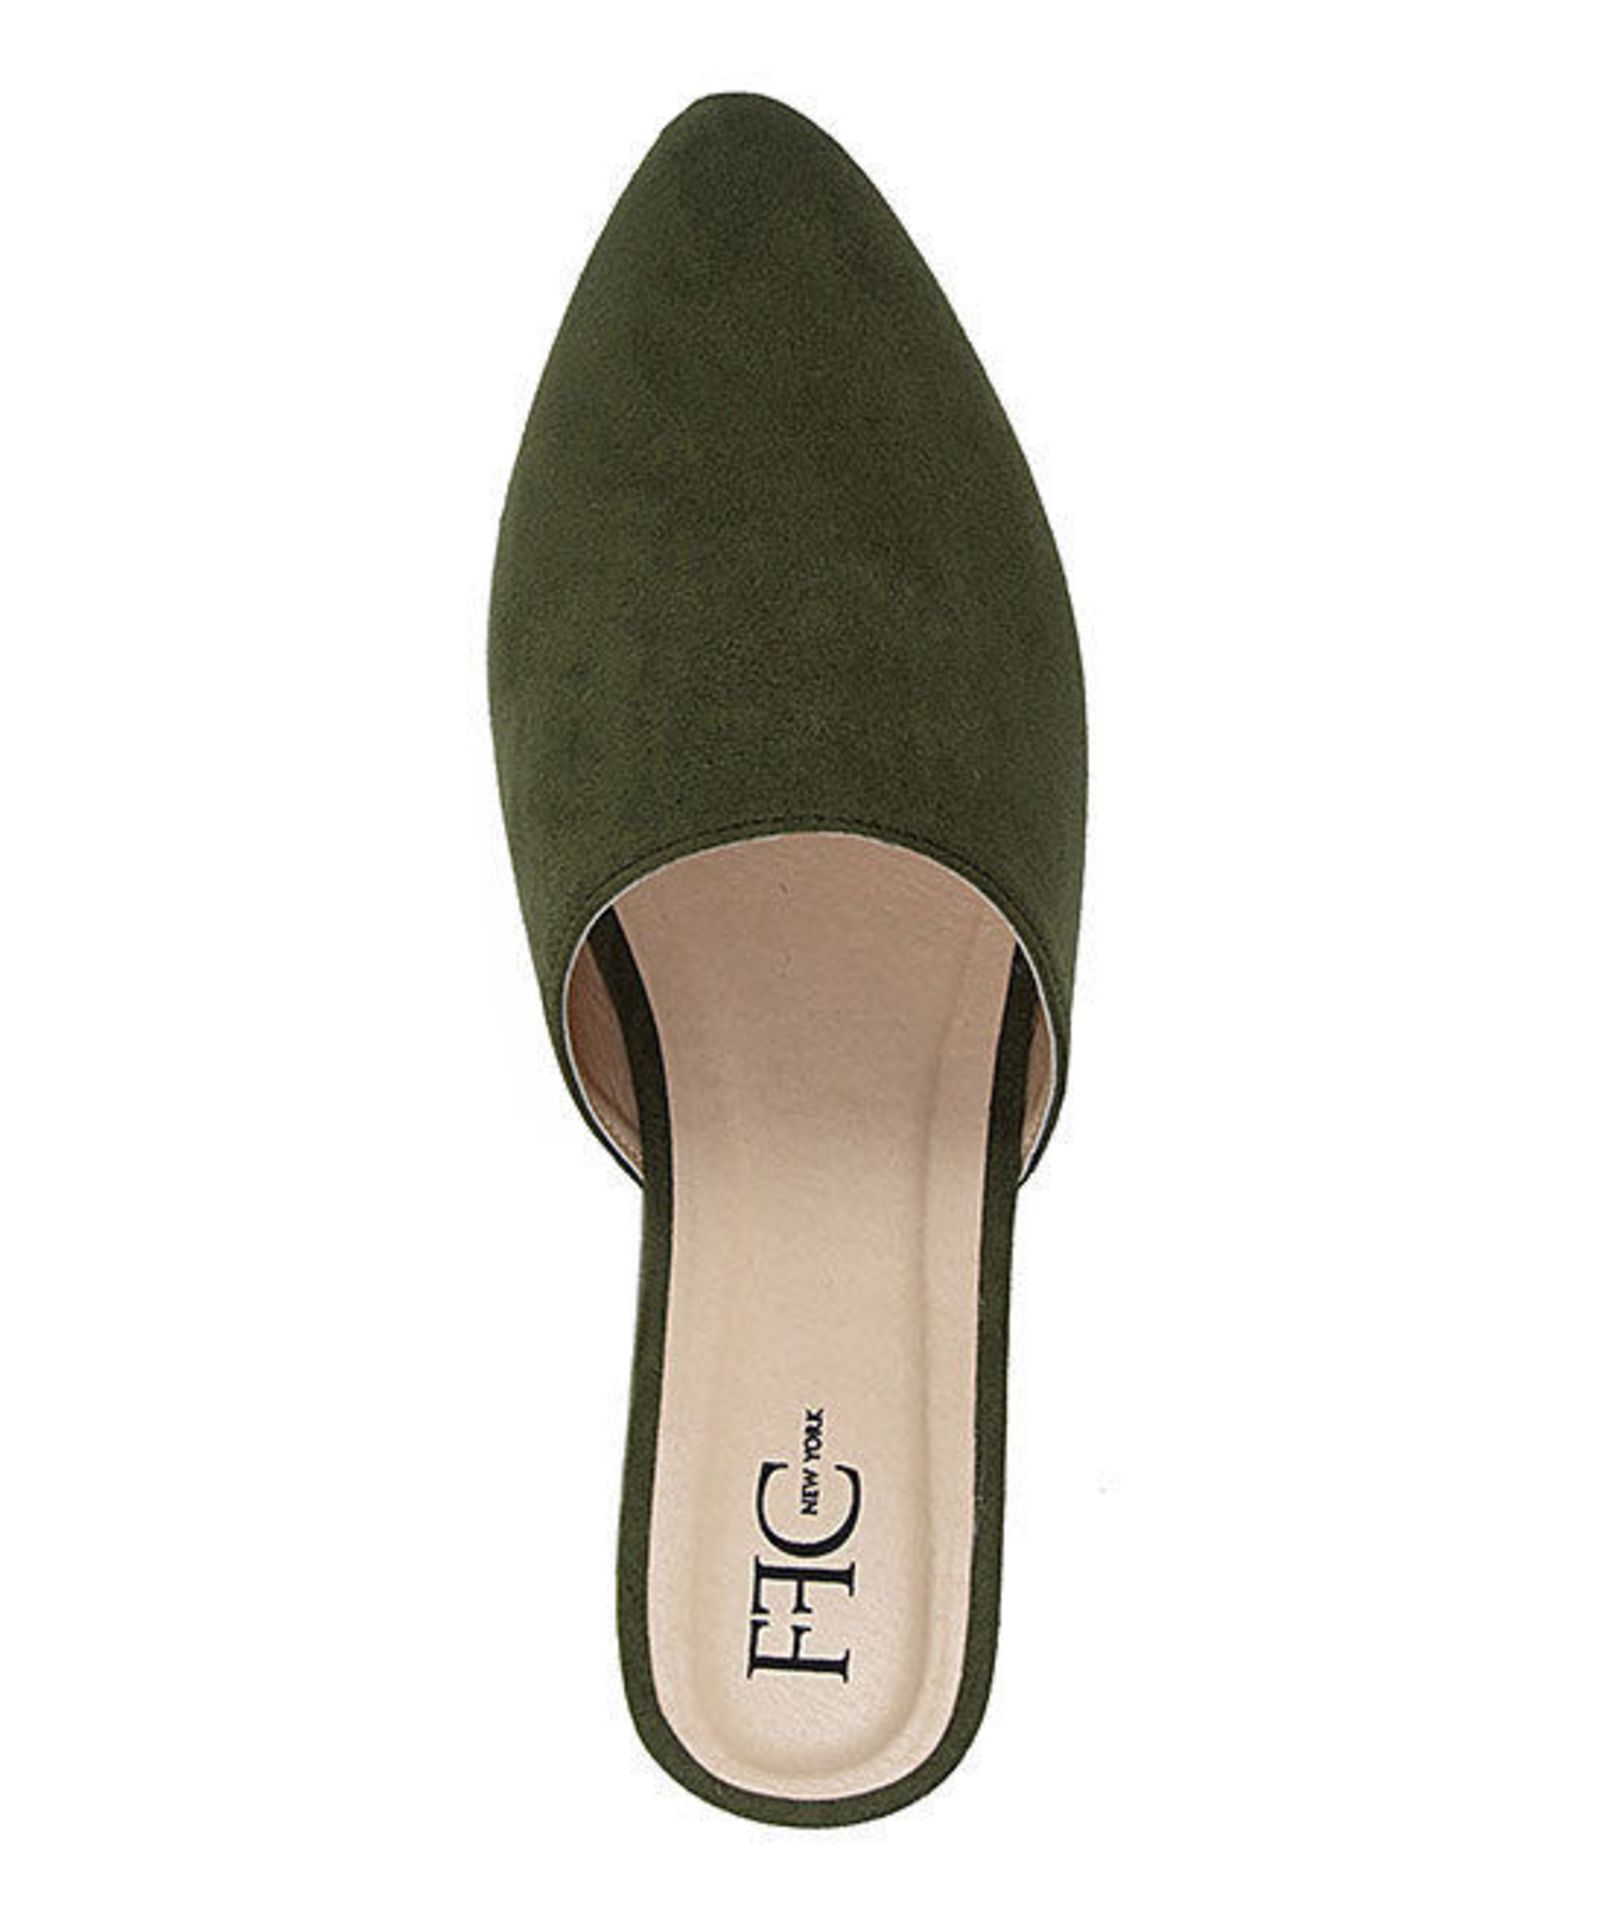 Ffc New York, Green Microsuede Sabrina Mule, Us Size 8/Eu 38 (New With Box) [Ref: 47048739- G-001]- - Image 3 of 3